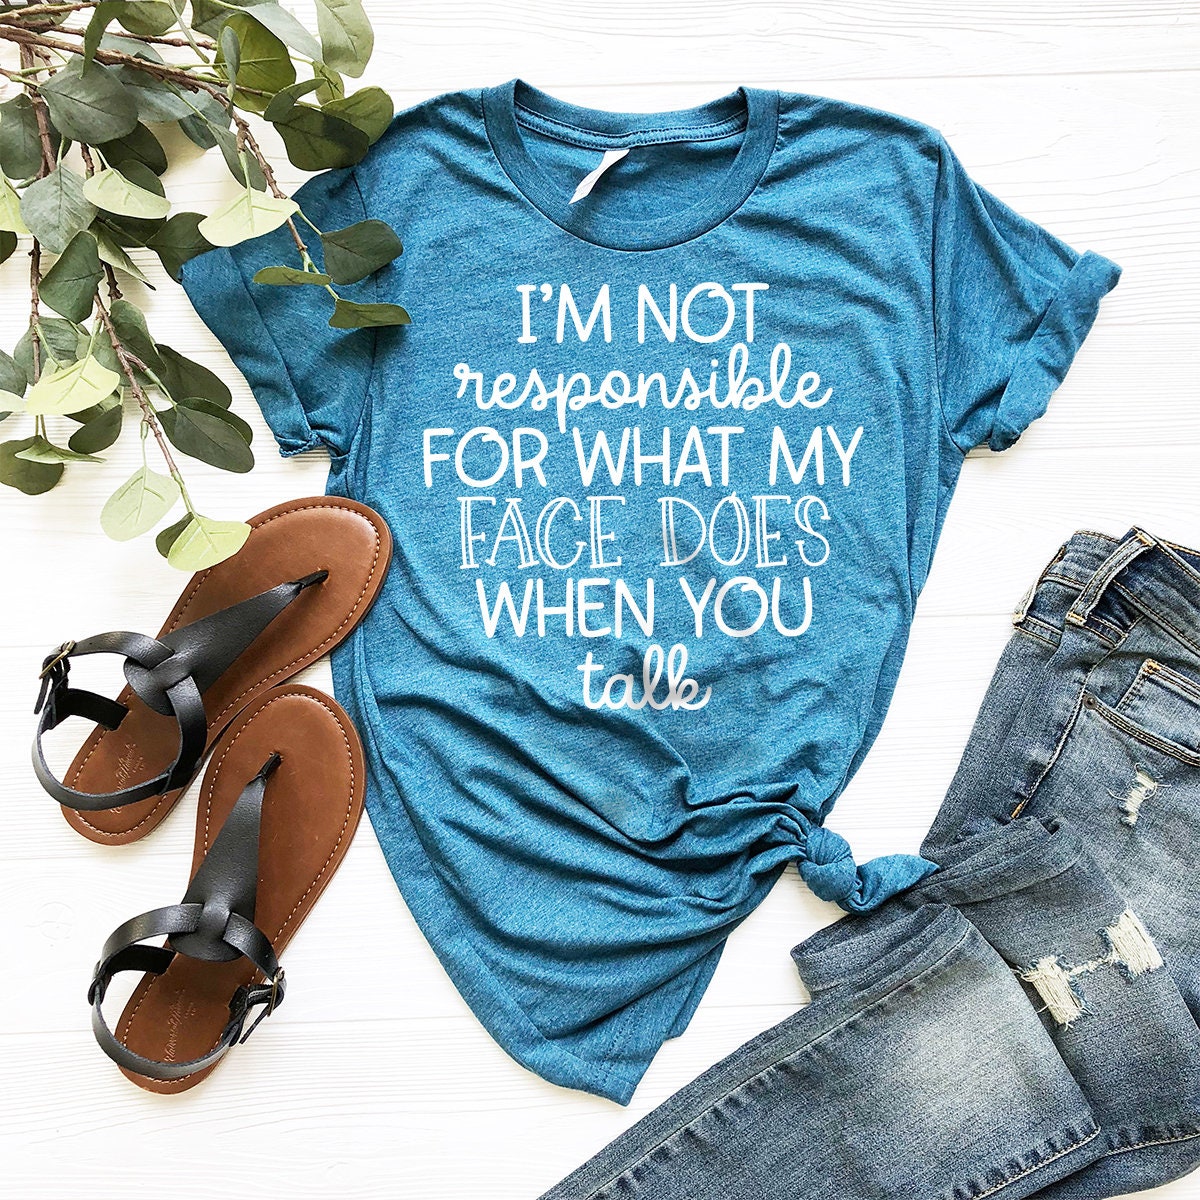 I'm Not Responsible For What My Face Does When You Talk T-Shirt, Responsible Quote Shirt,Sarcastic Tee,Smartass Shirt,Funny Sarcasm Shirt - Fastdeliverytees.com